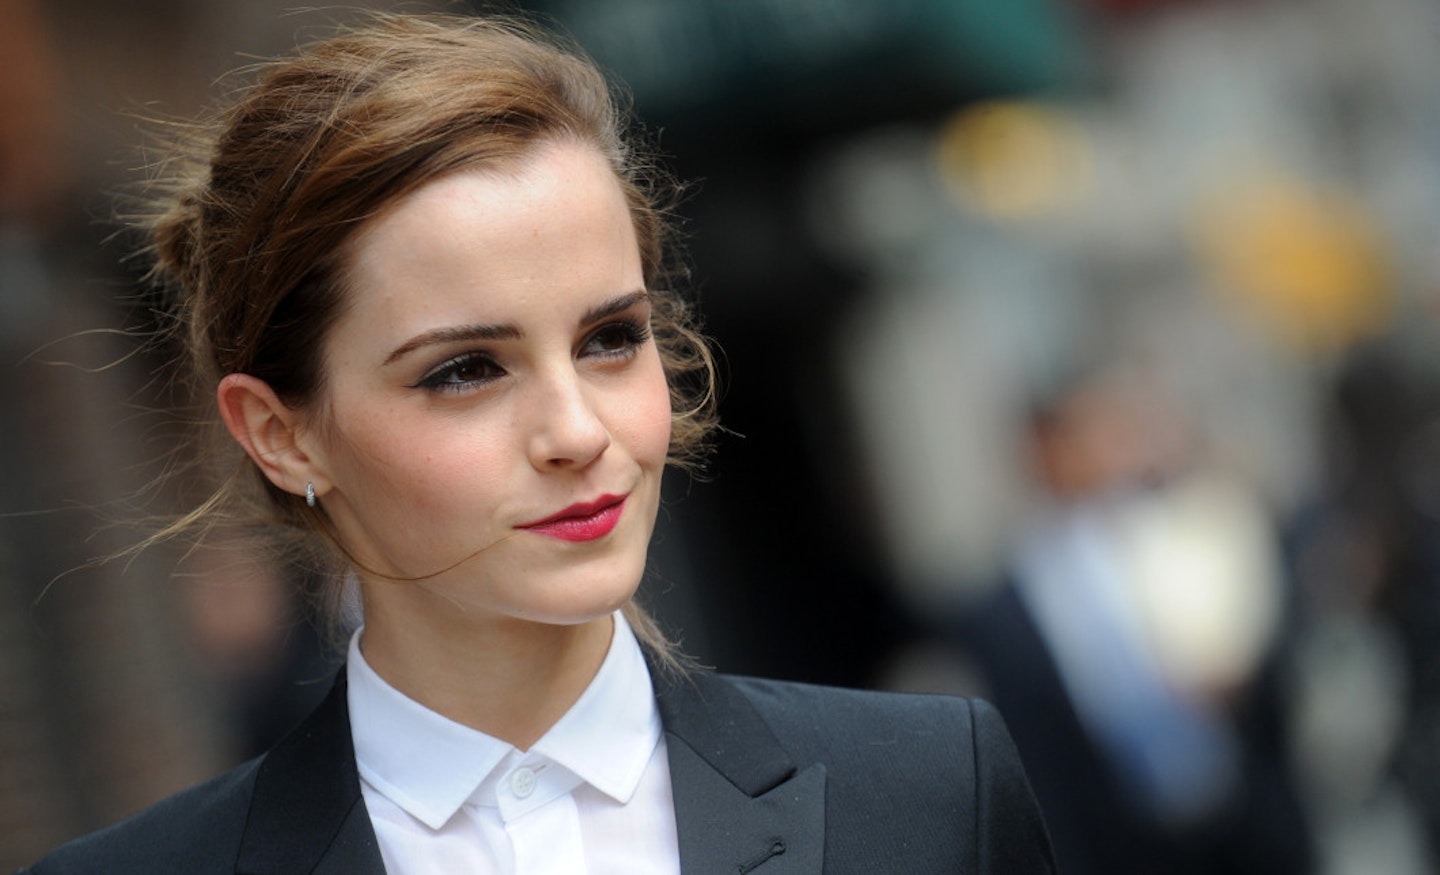 Emma Watson brought back a forgotten hair trend for her BAFTAs